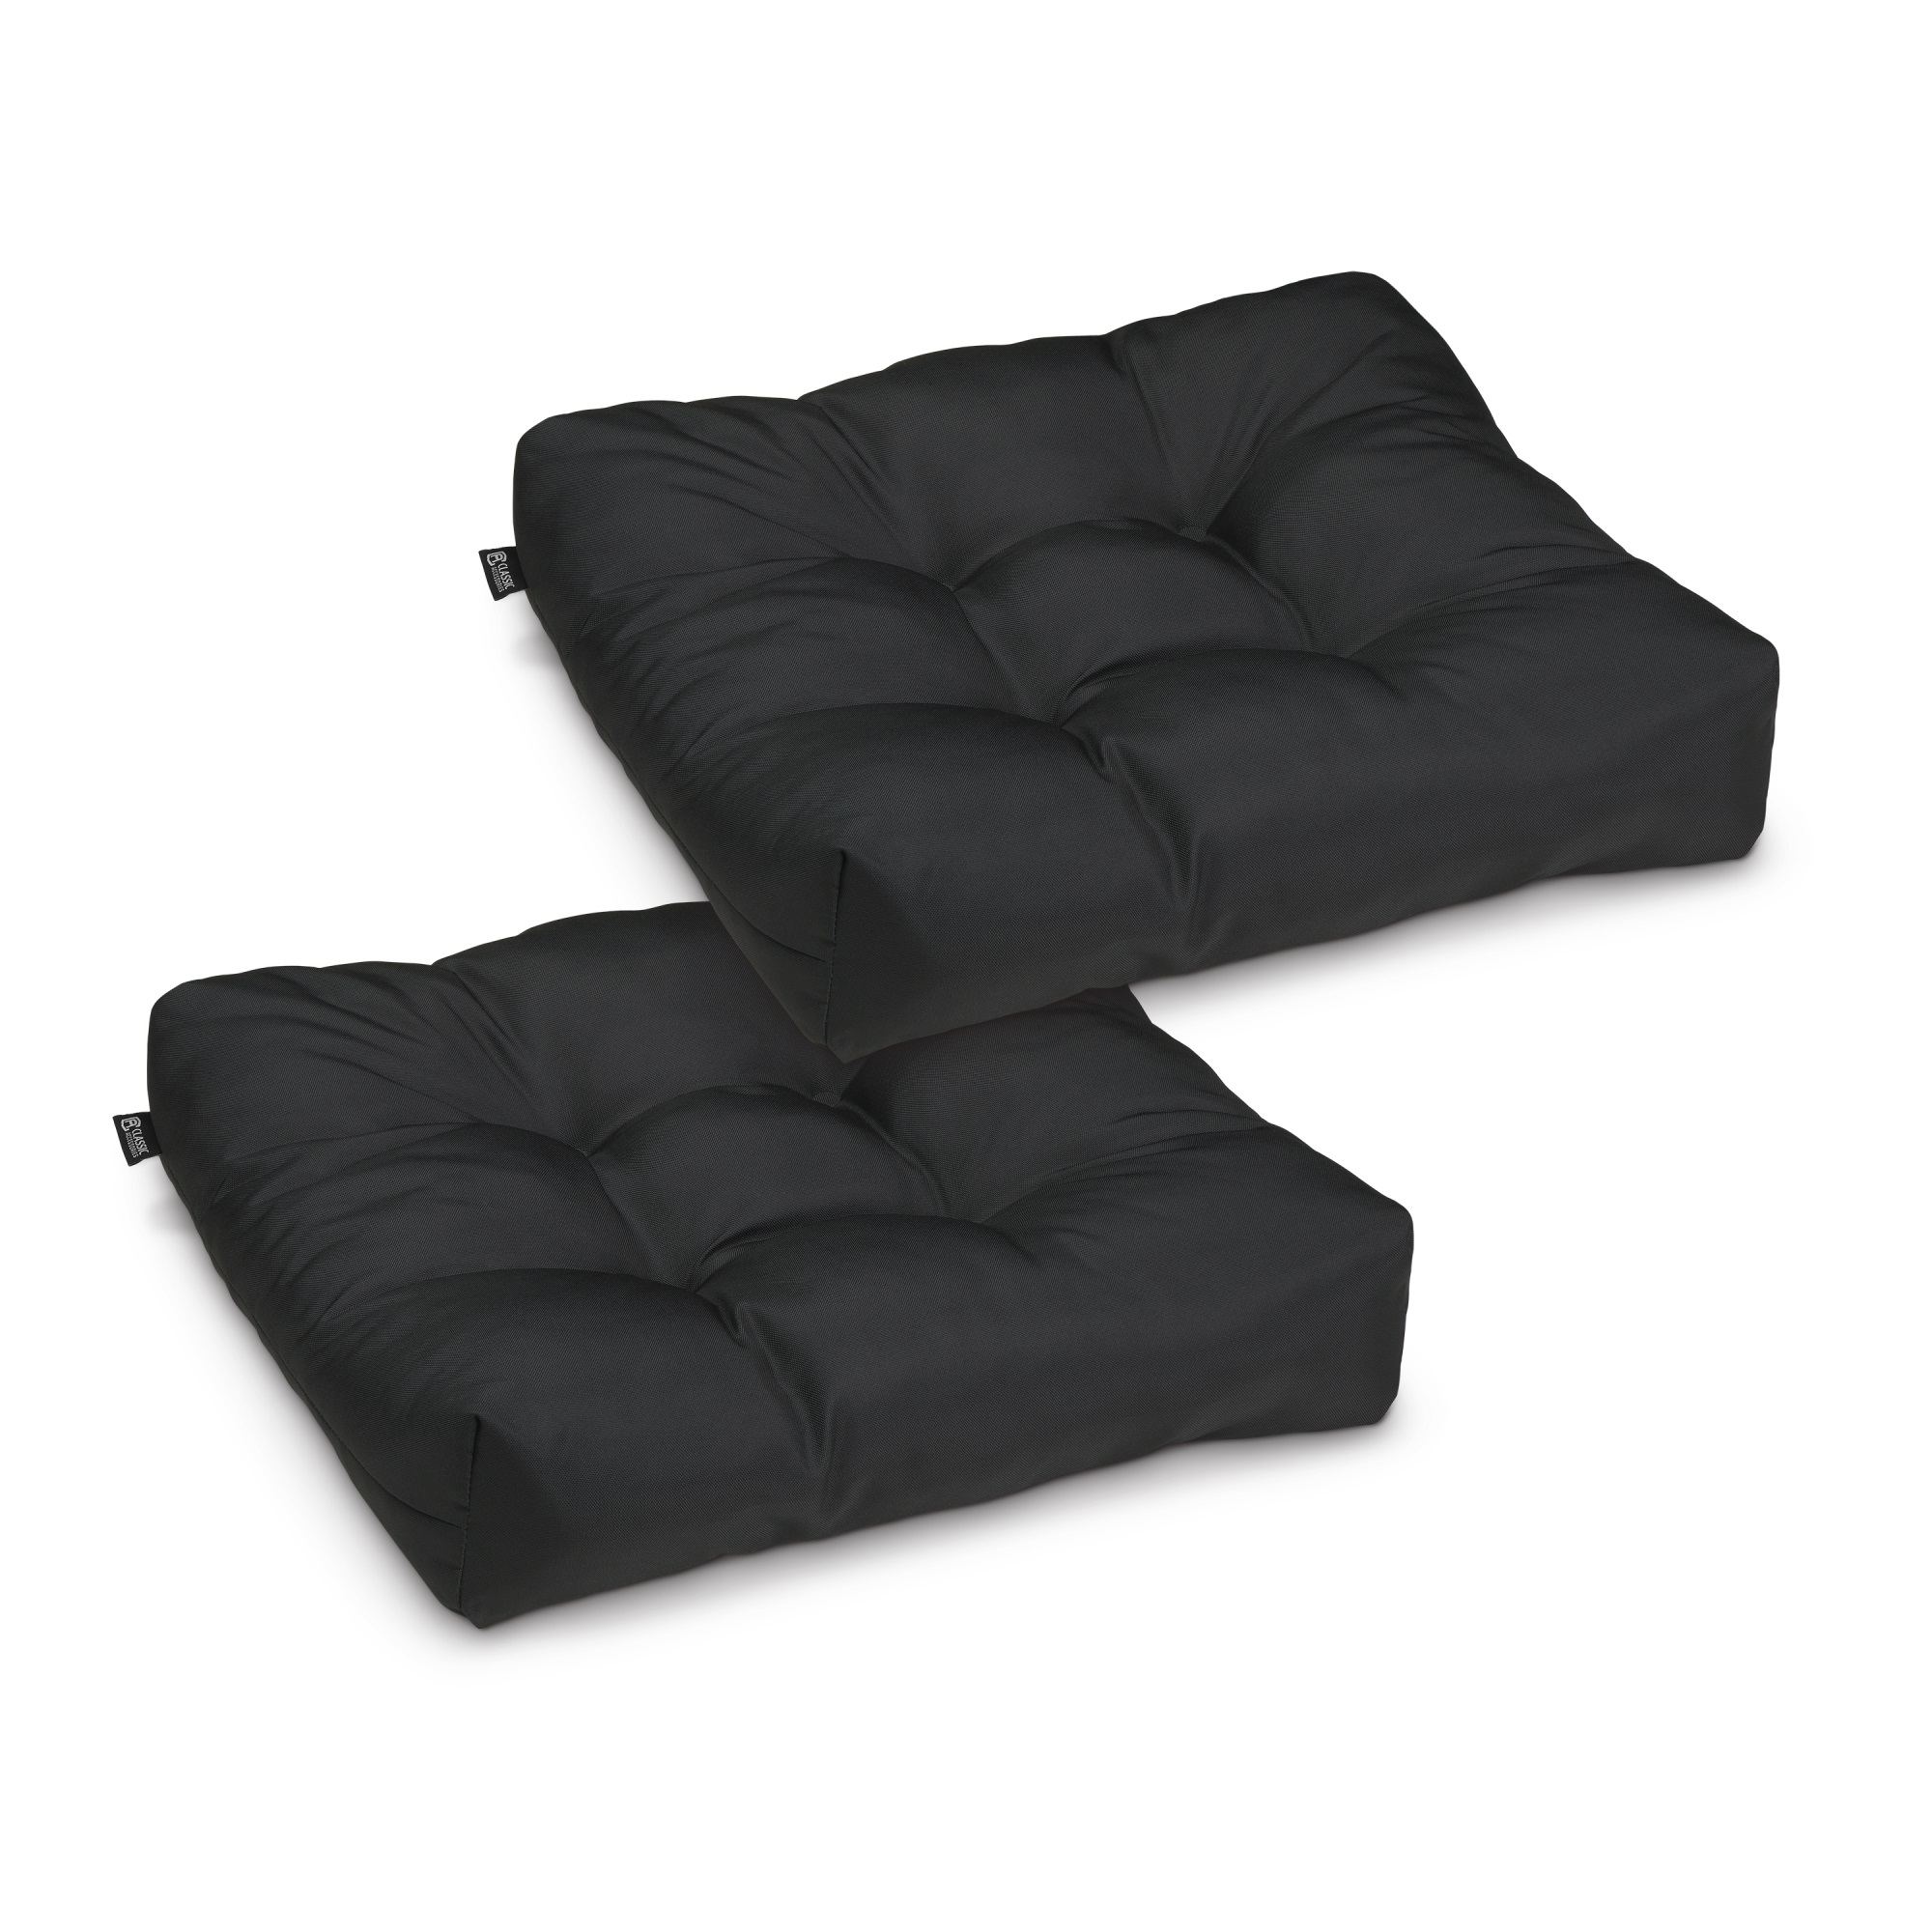 Classic Accessories Water-Resistant 19 x 19 x 5 Inch Square Patio Seat Cushion, Black, 2-Pack